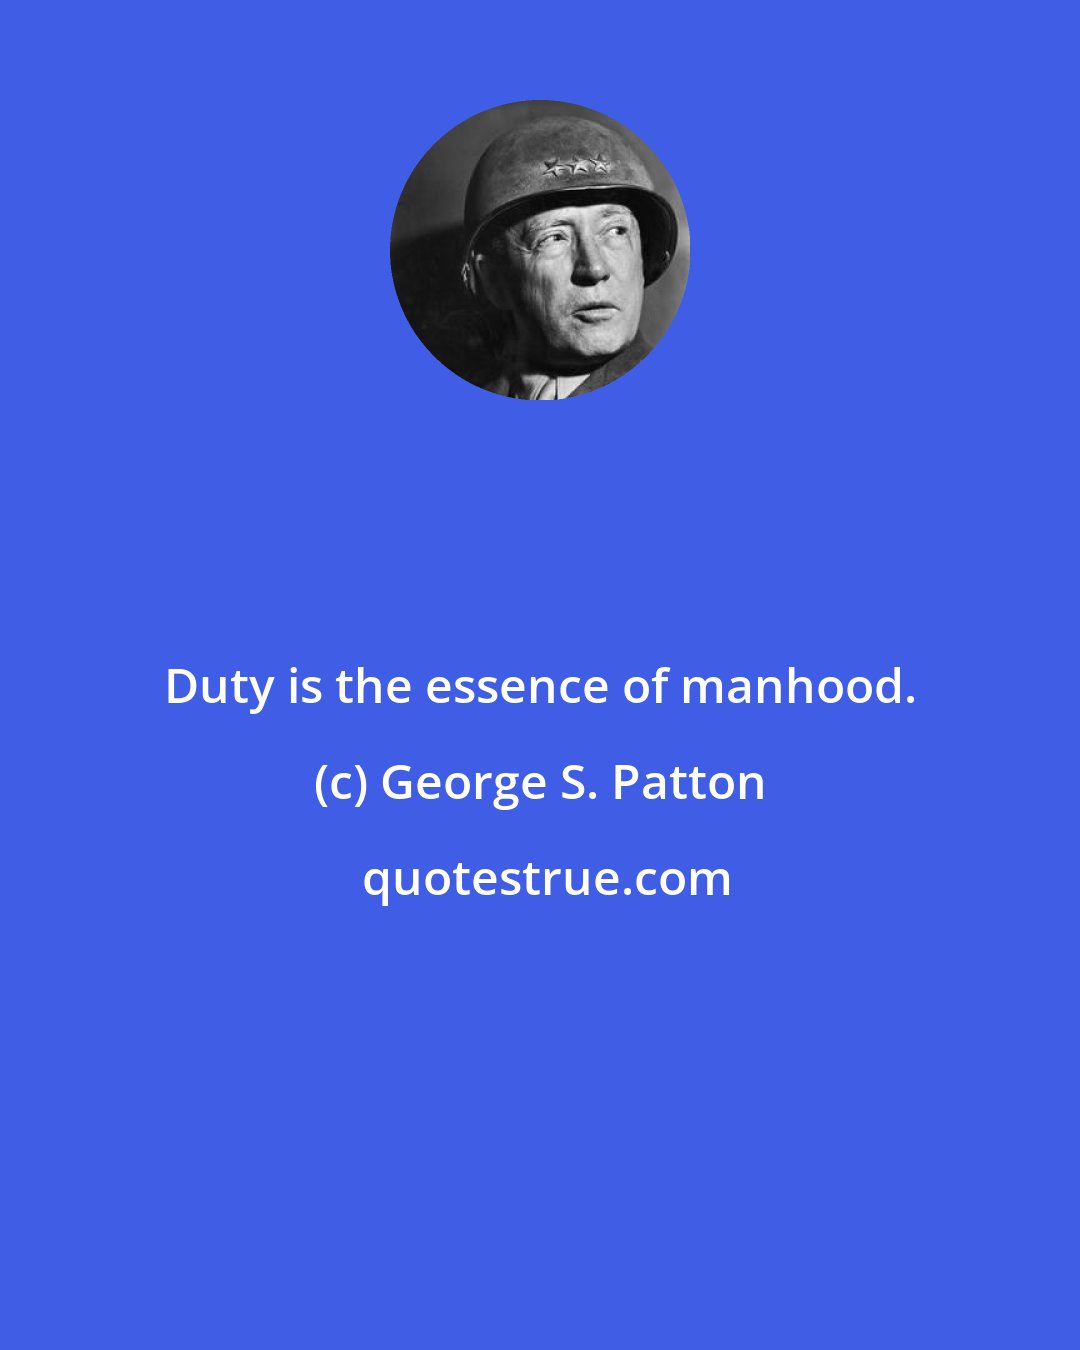 George S. Patton: Duty is the essence of manhood.